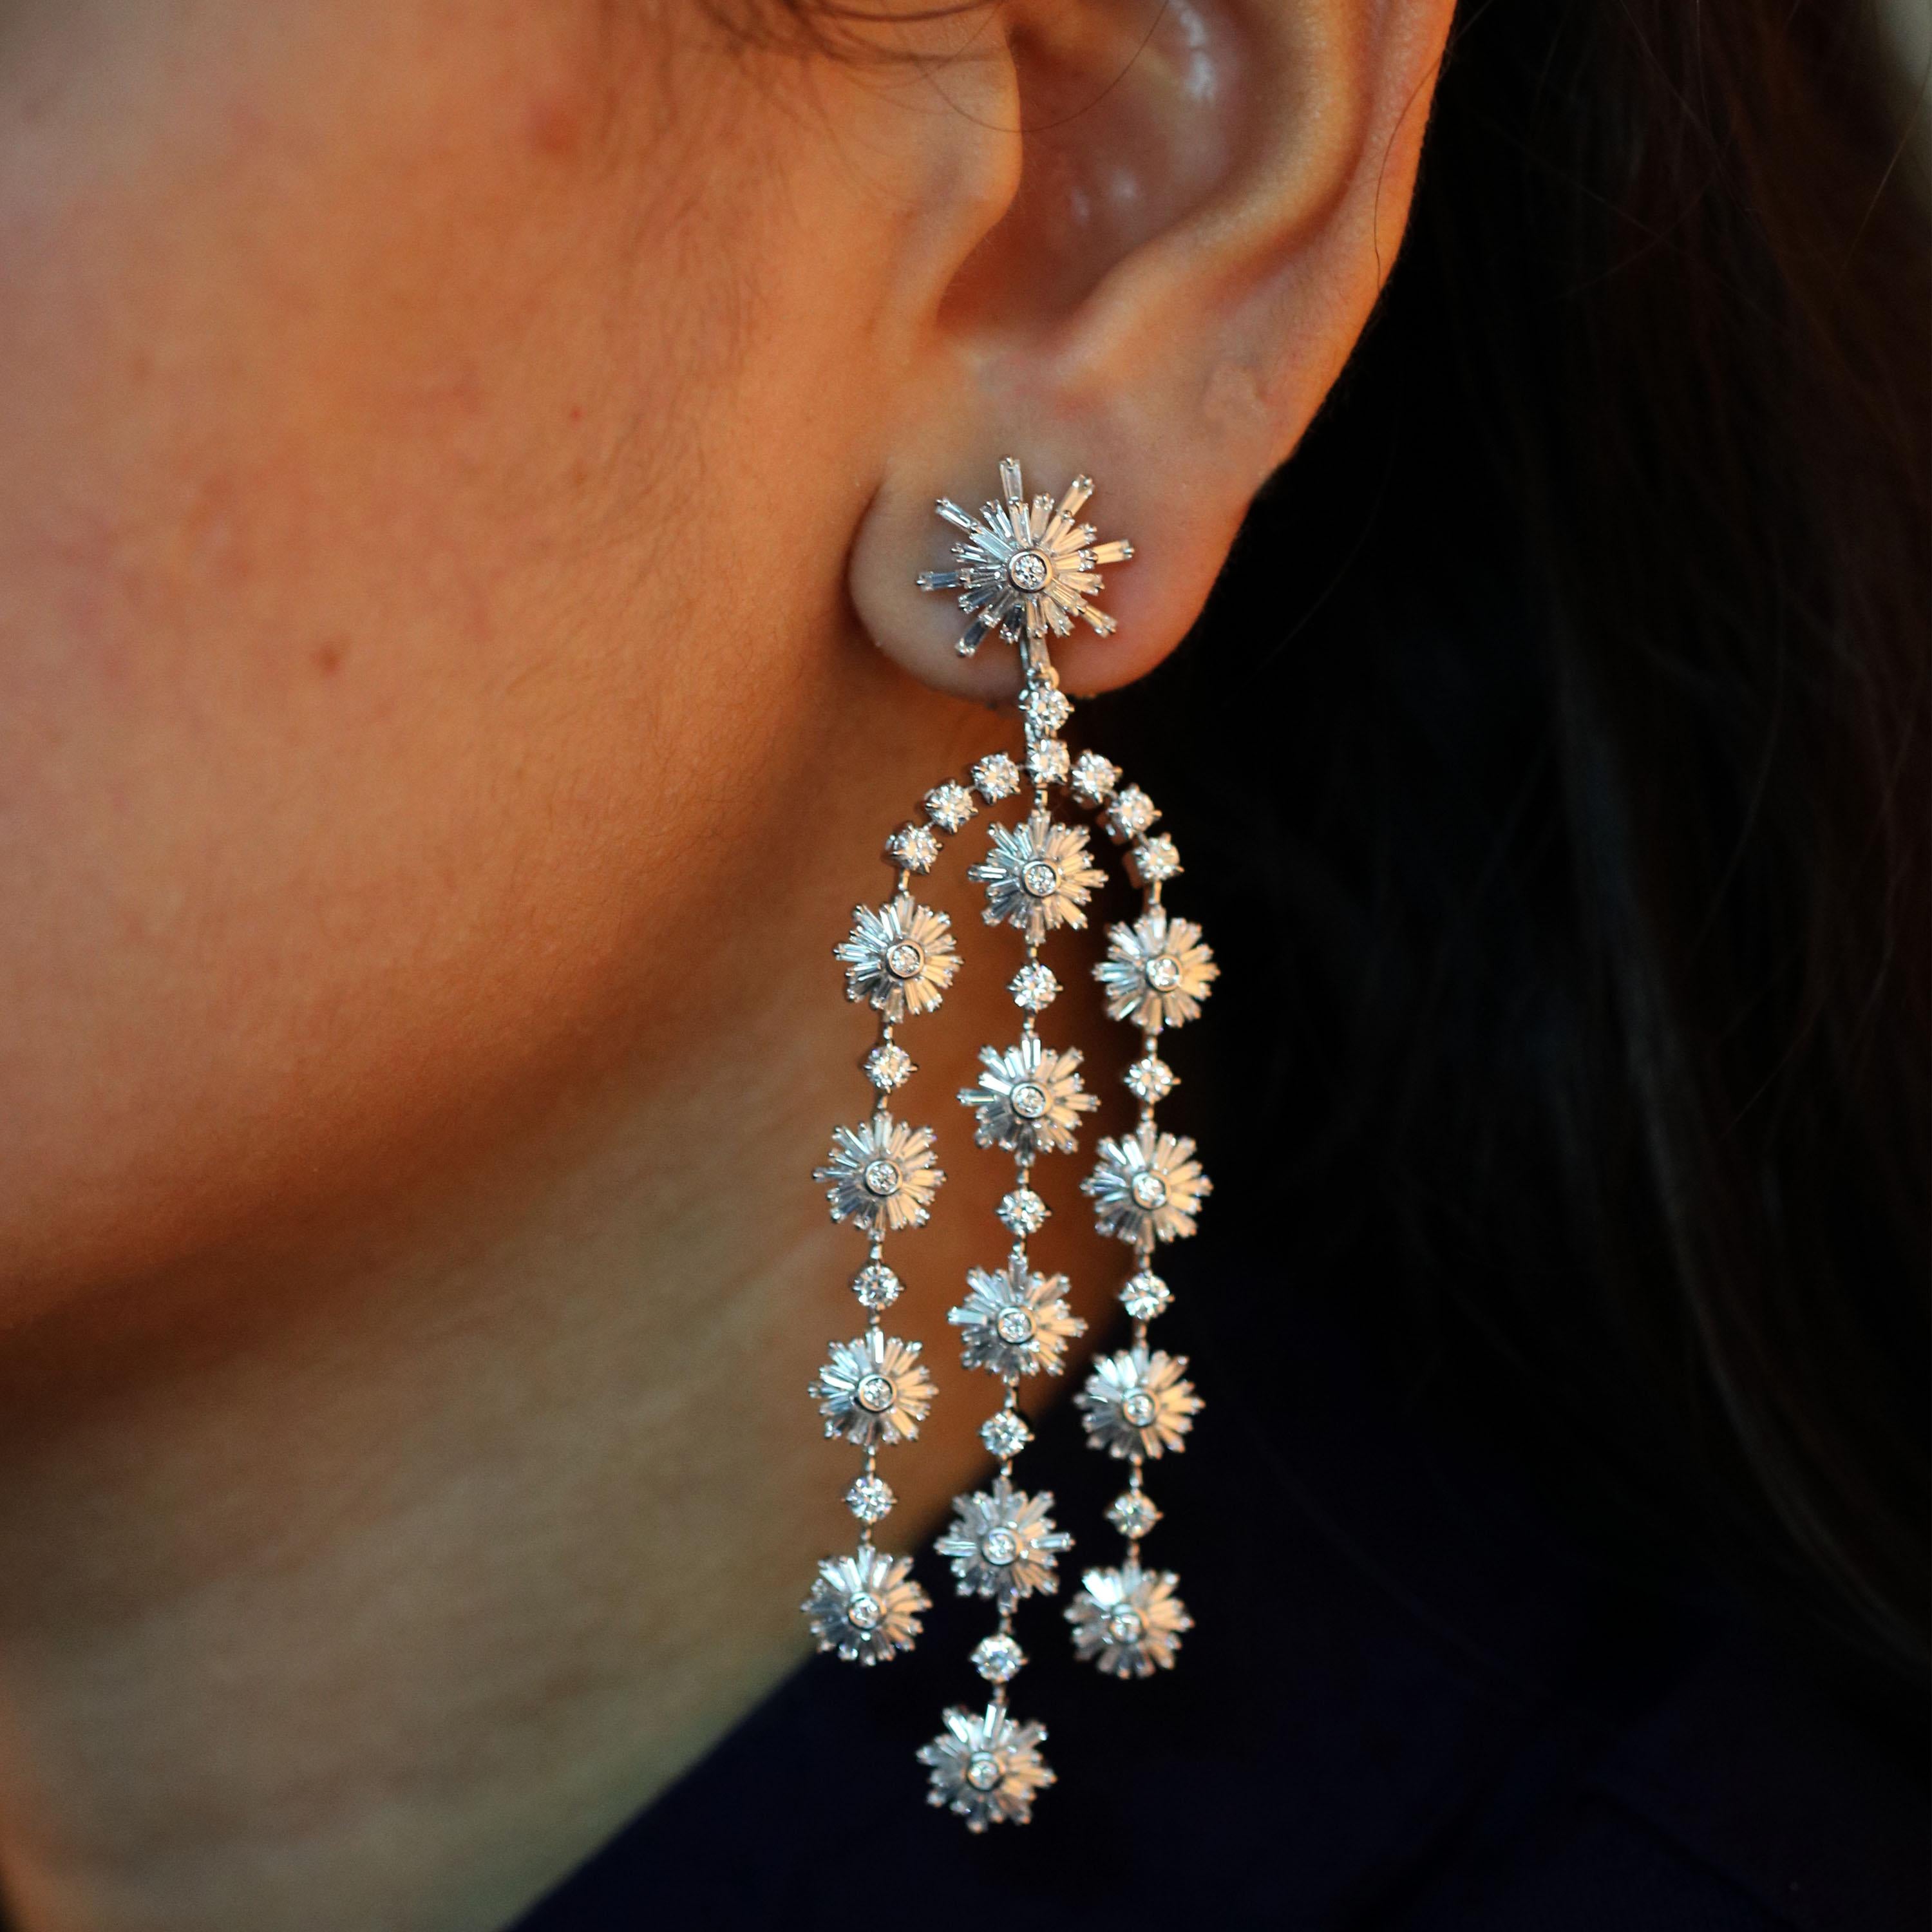 Gross Weight: 29.46 gms
Diamond Weight: 7.63 cts
IGI Certification can be done on request

Video of the product can be shared on Request.

Delicate and intricate like a snowflake, this 18K white gold earrings is frosted with tapers and round